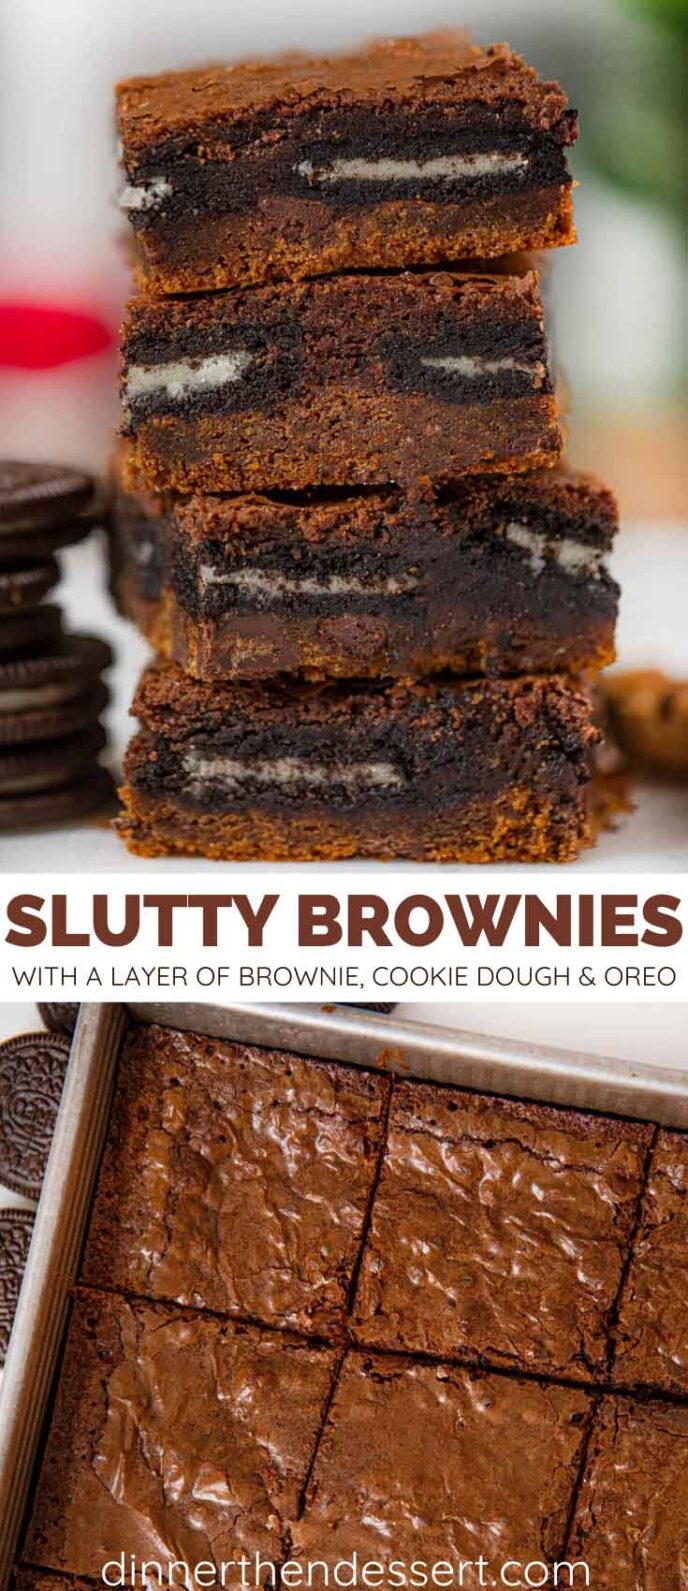 Oreo Cookie Dough Slutty Brownies collage